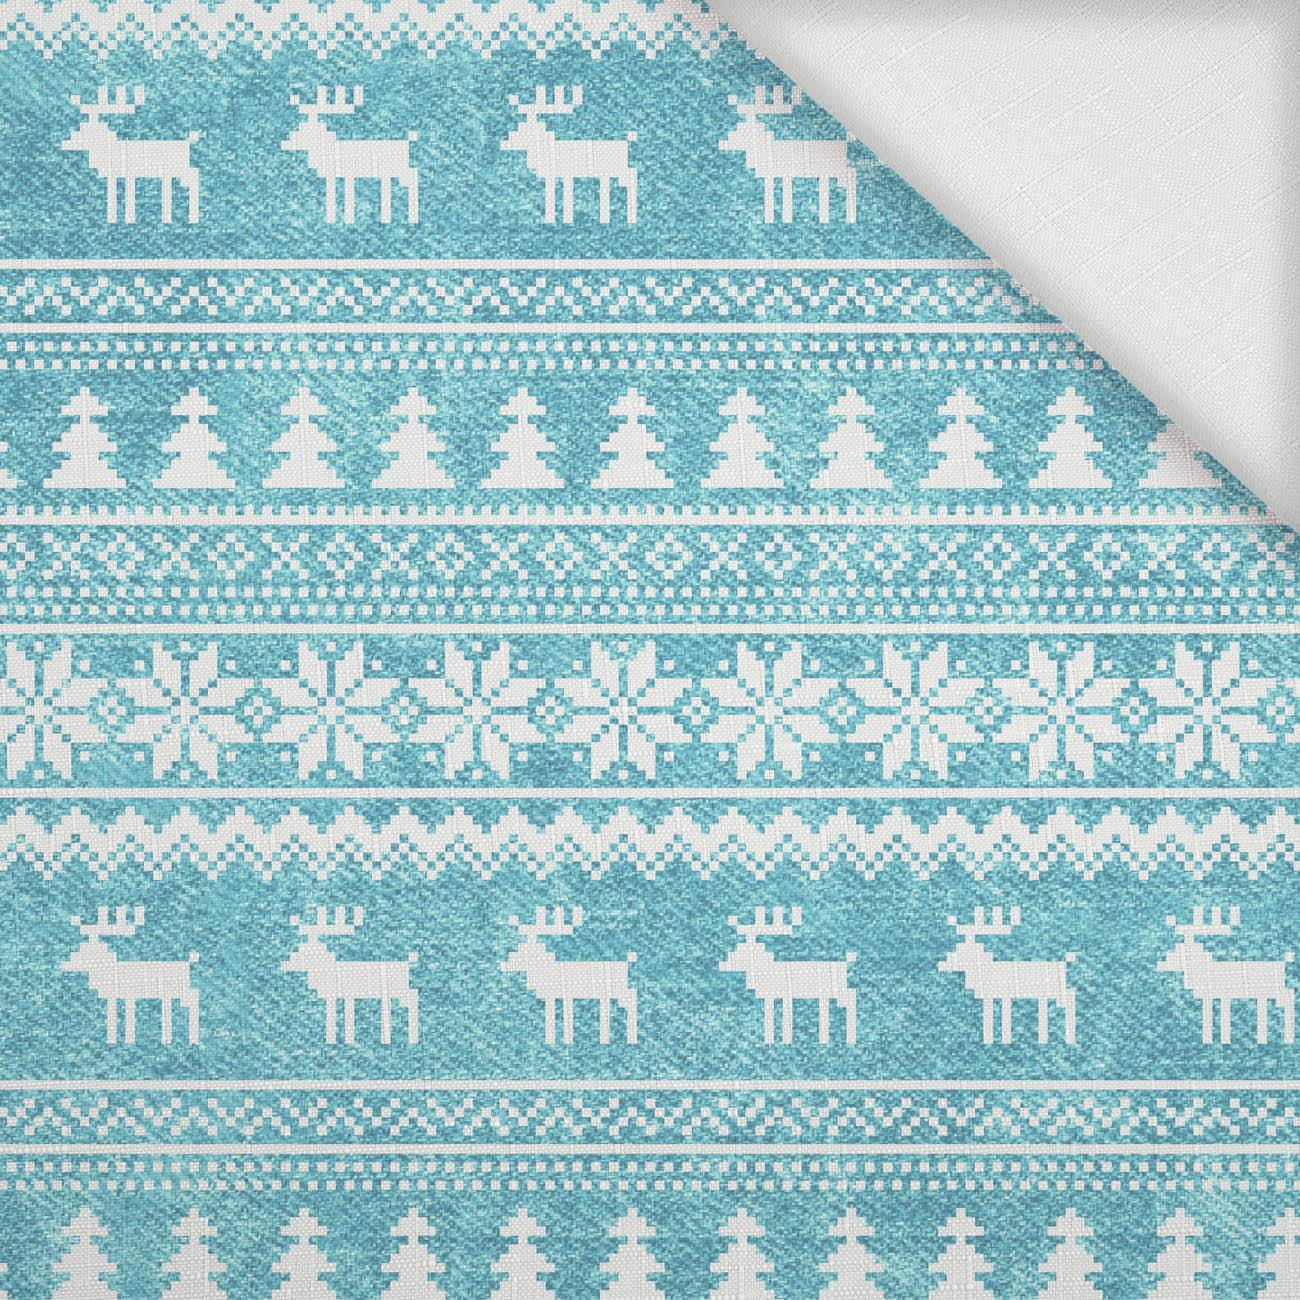 REINDEERS PAT. 2 / ACID WASH SEA BLUE - Woven Fabric for tablecloths